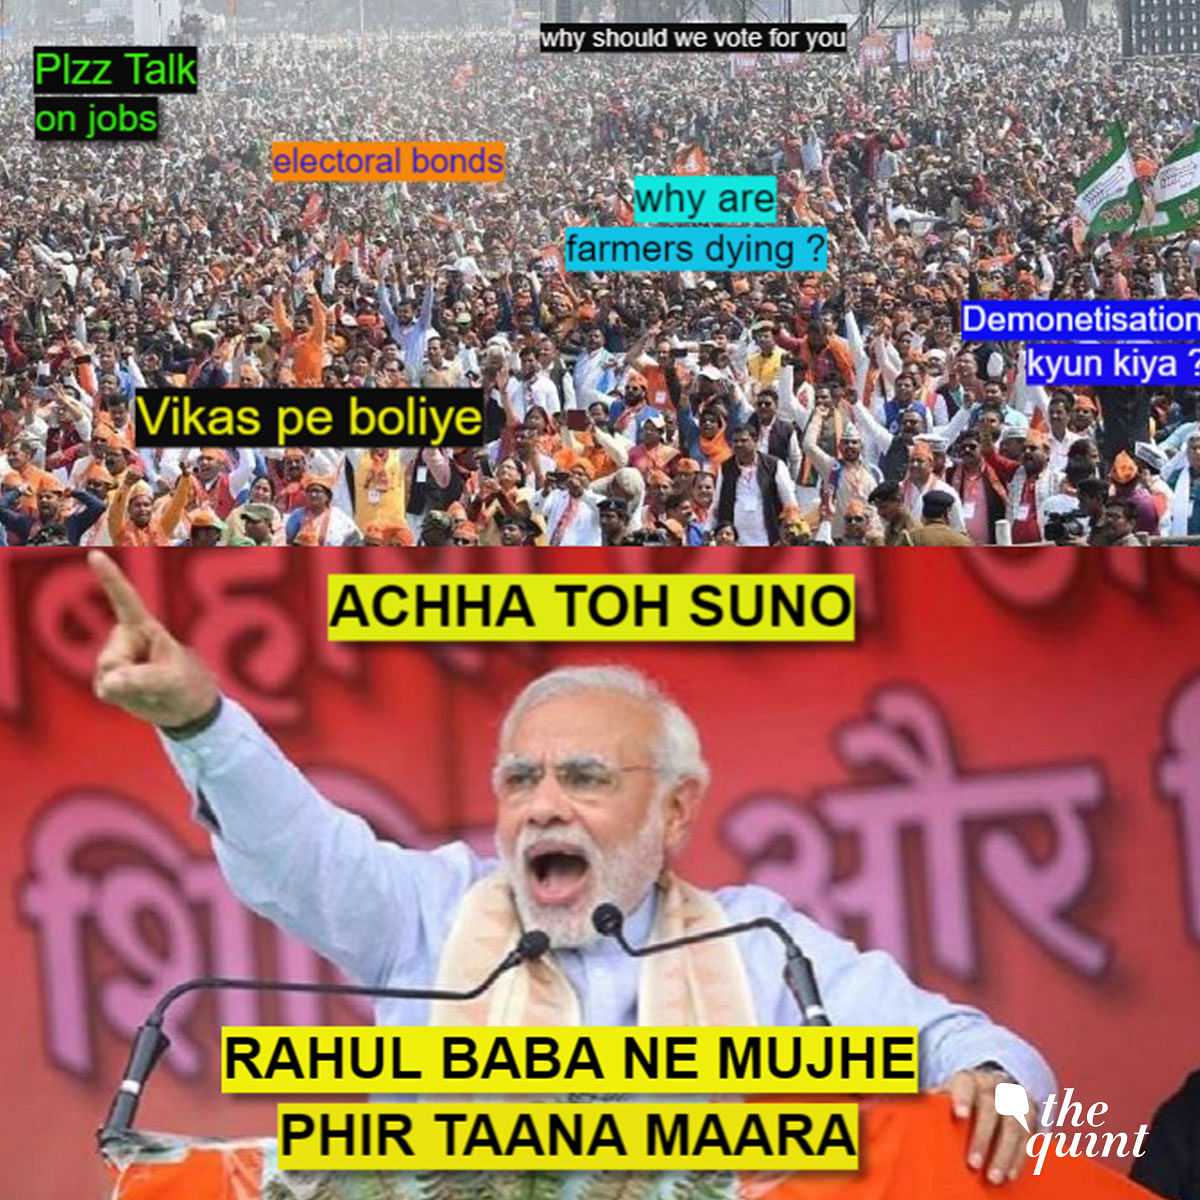 Akshay shared four memes with PM Modi during the interview.